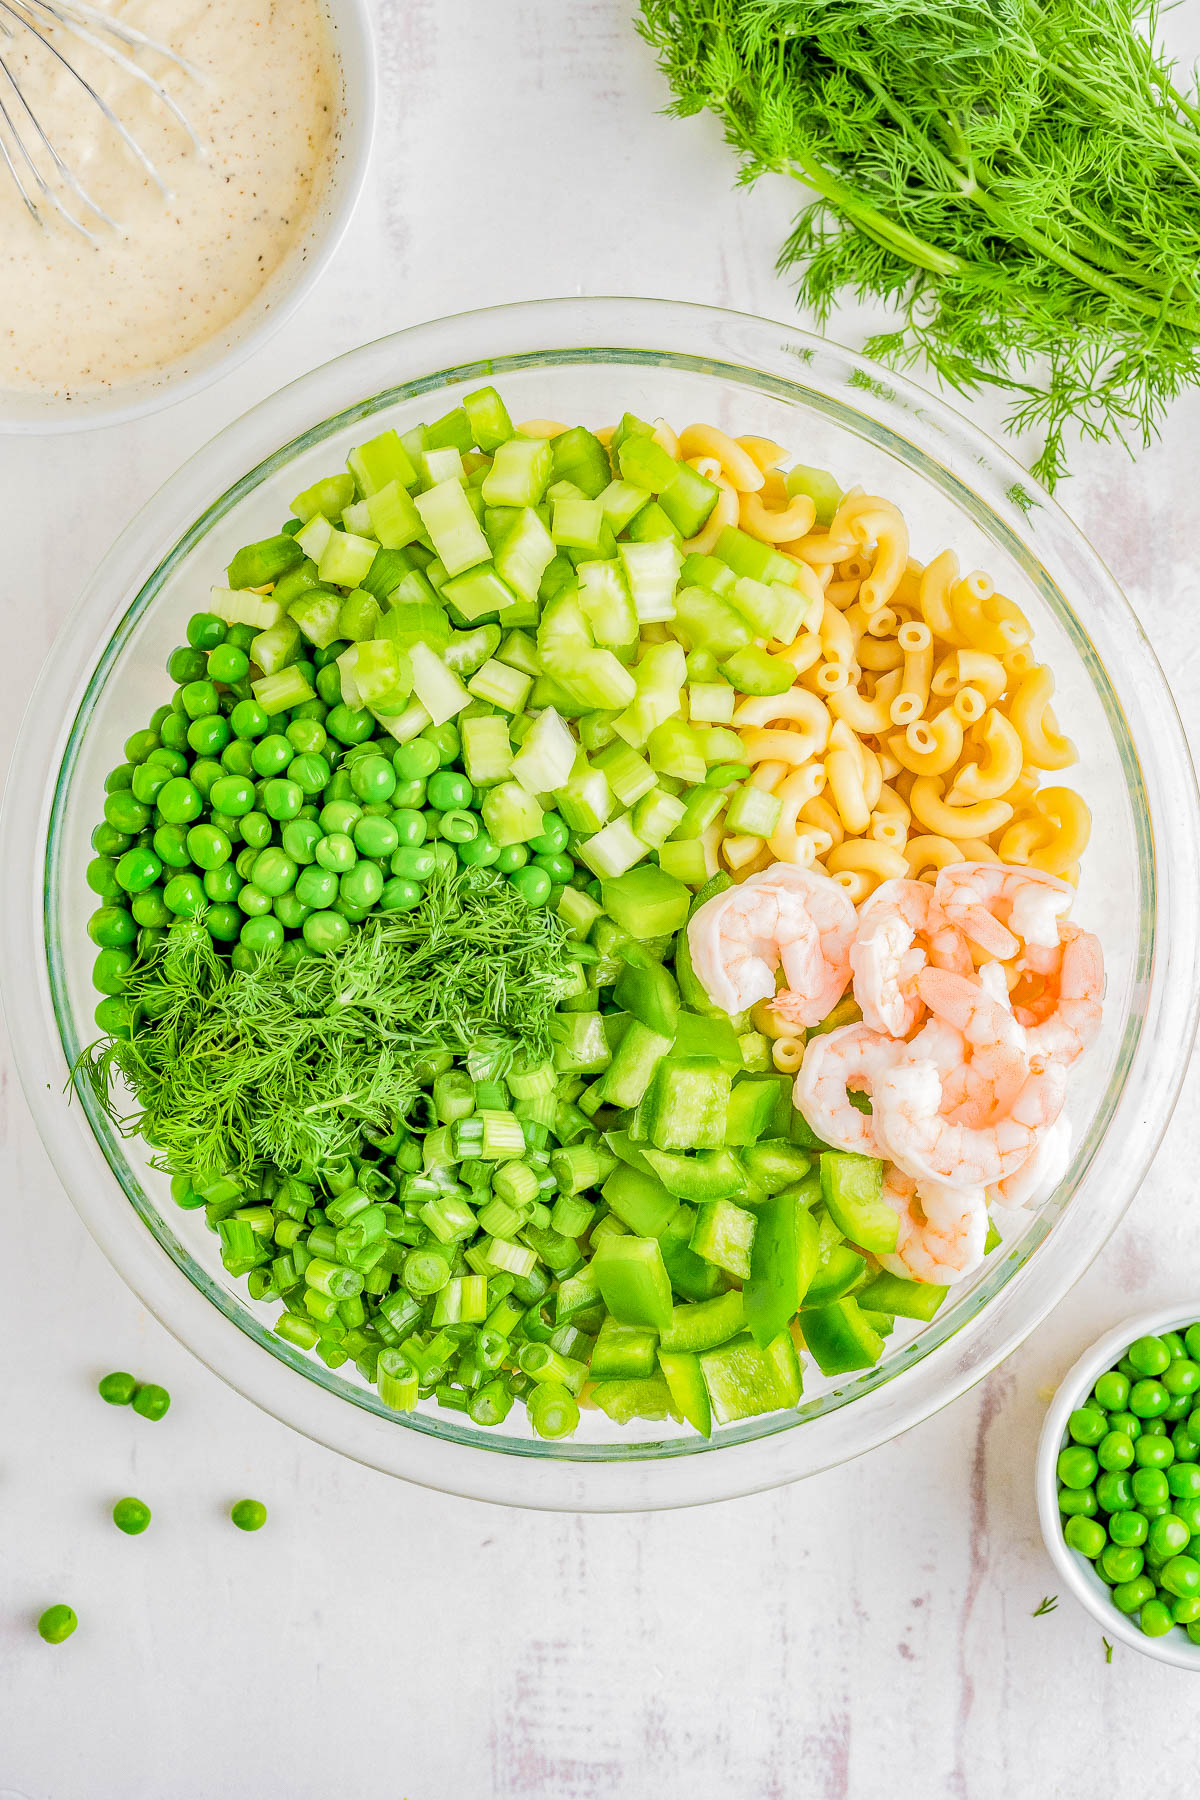 A glass bowl containing a salad with pasta, shrimp, green peas, chopped cucumber, and fresh dill, with a dressing on the side.